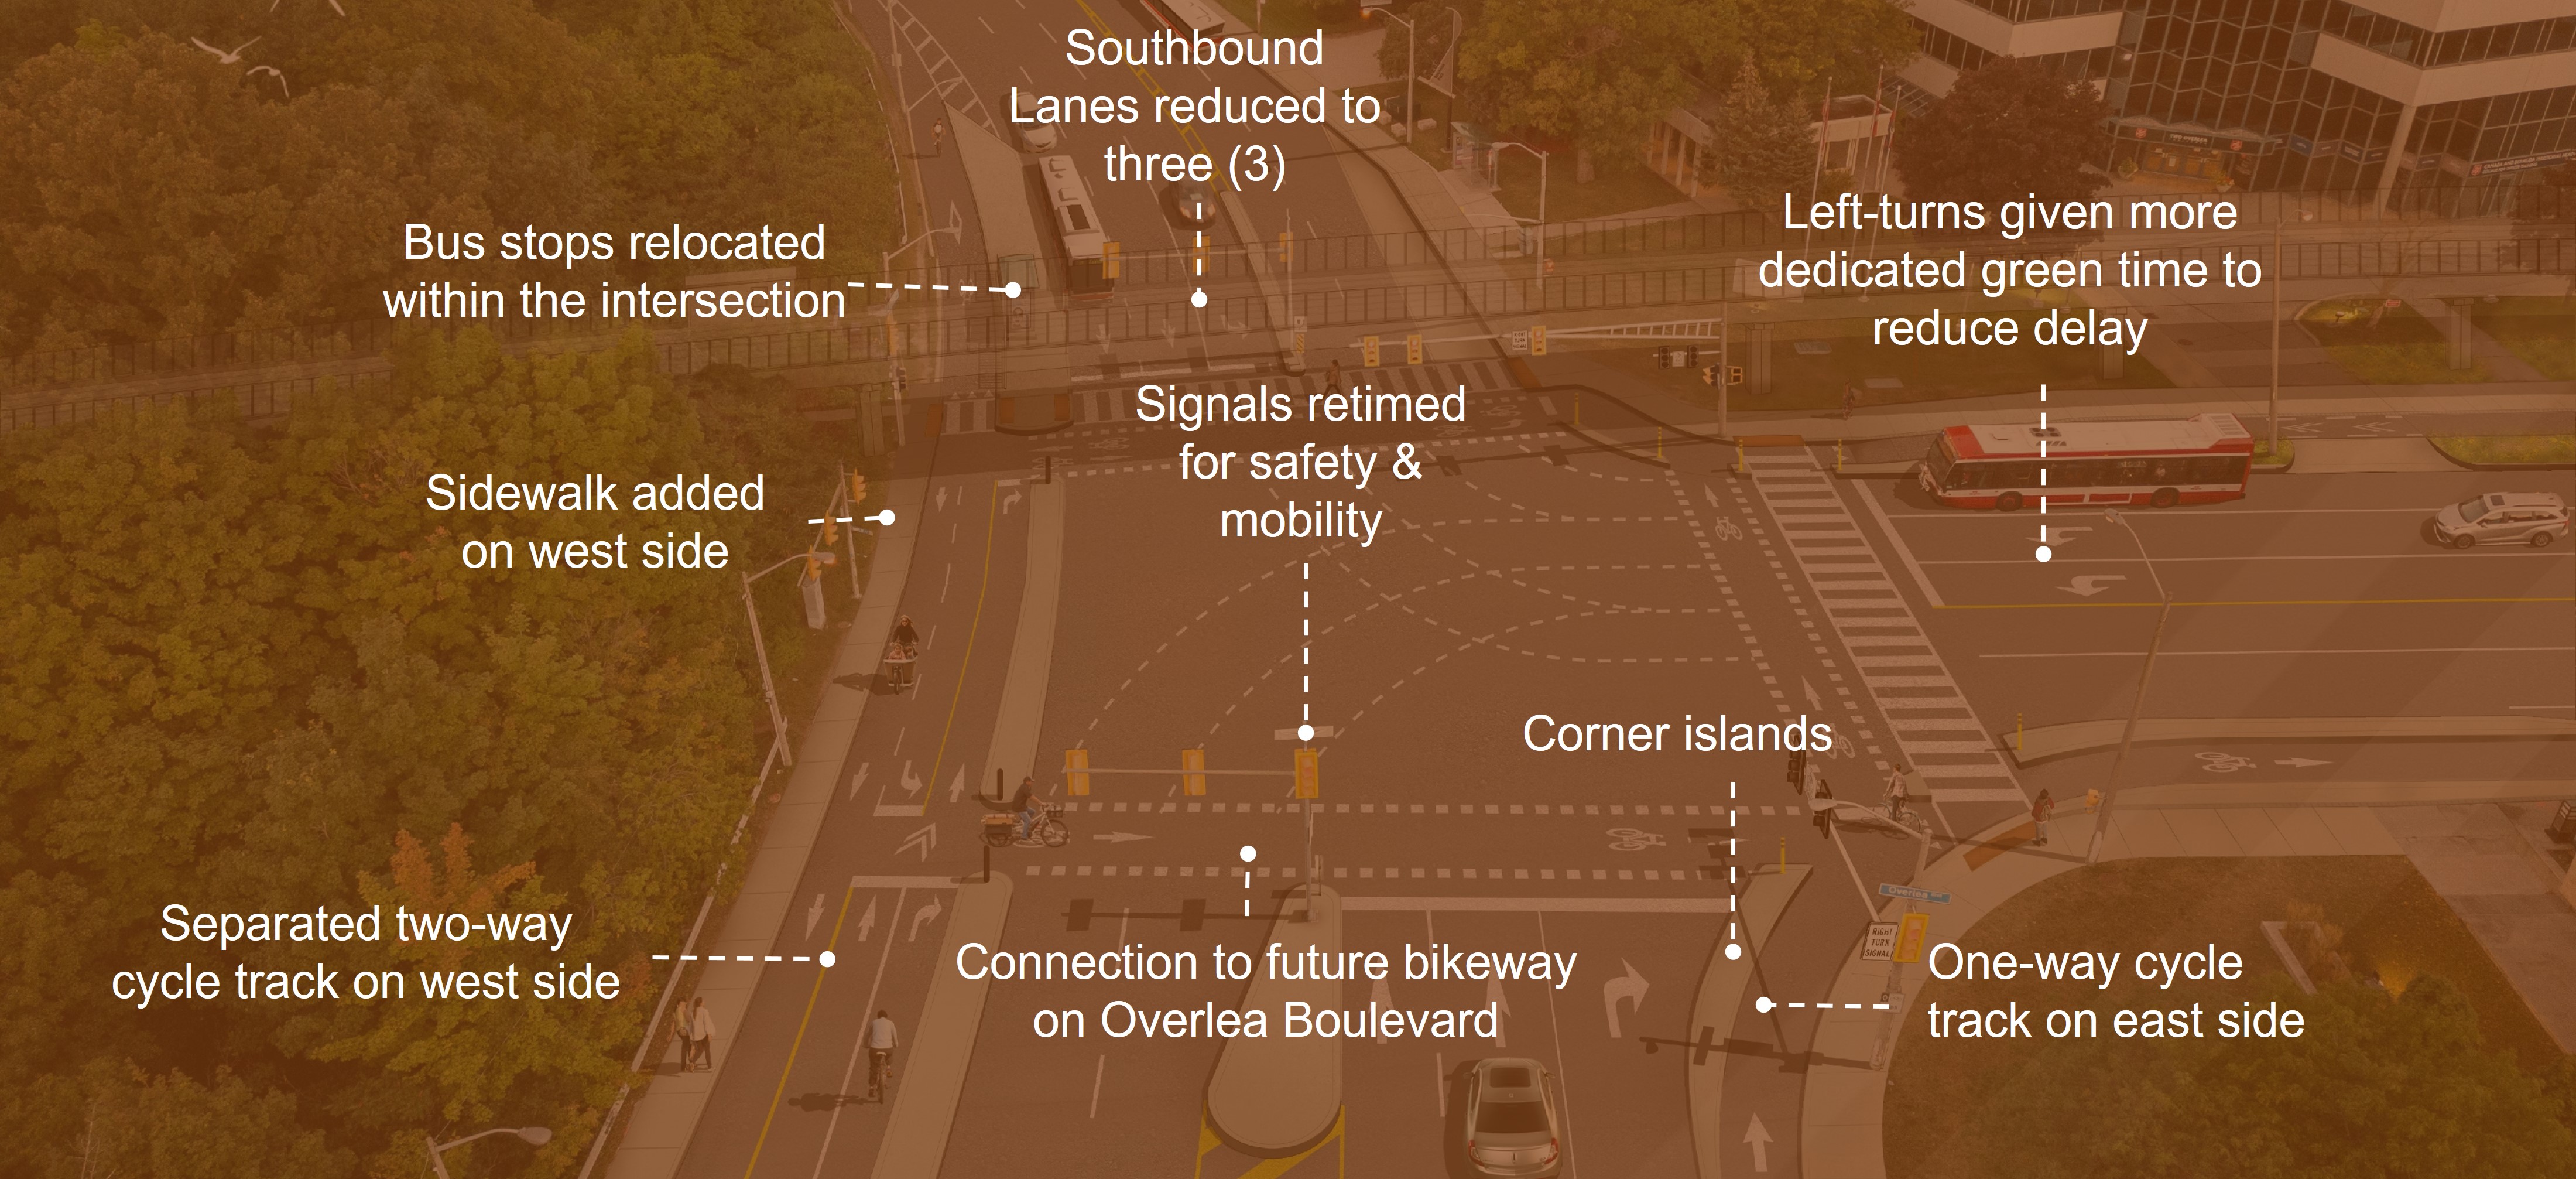 Labels pointing to areas of concern on the aerial view of the artistic rendering of the proposed design at Millwood Road and Overlea Boulevard.